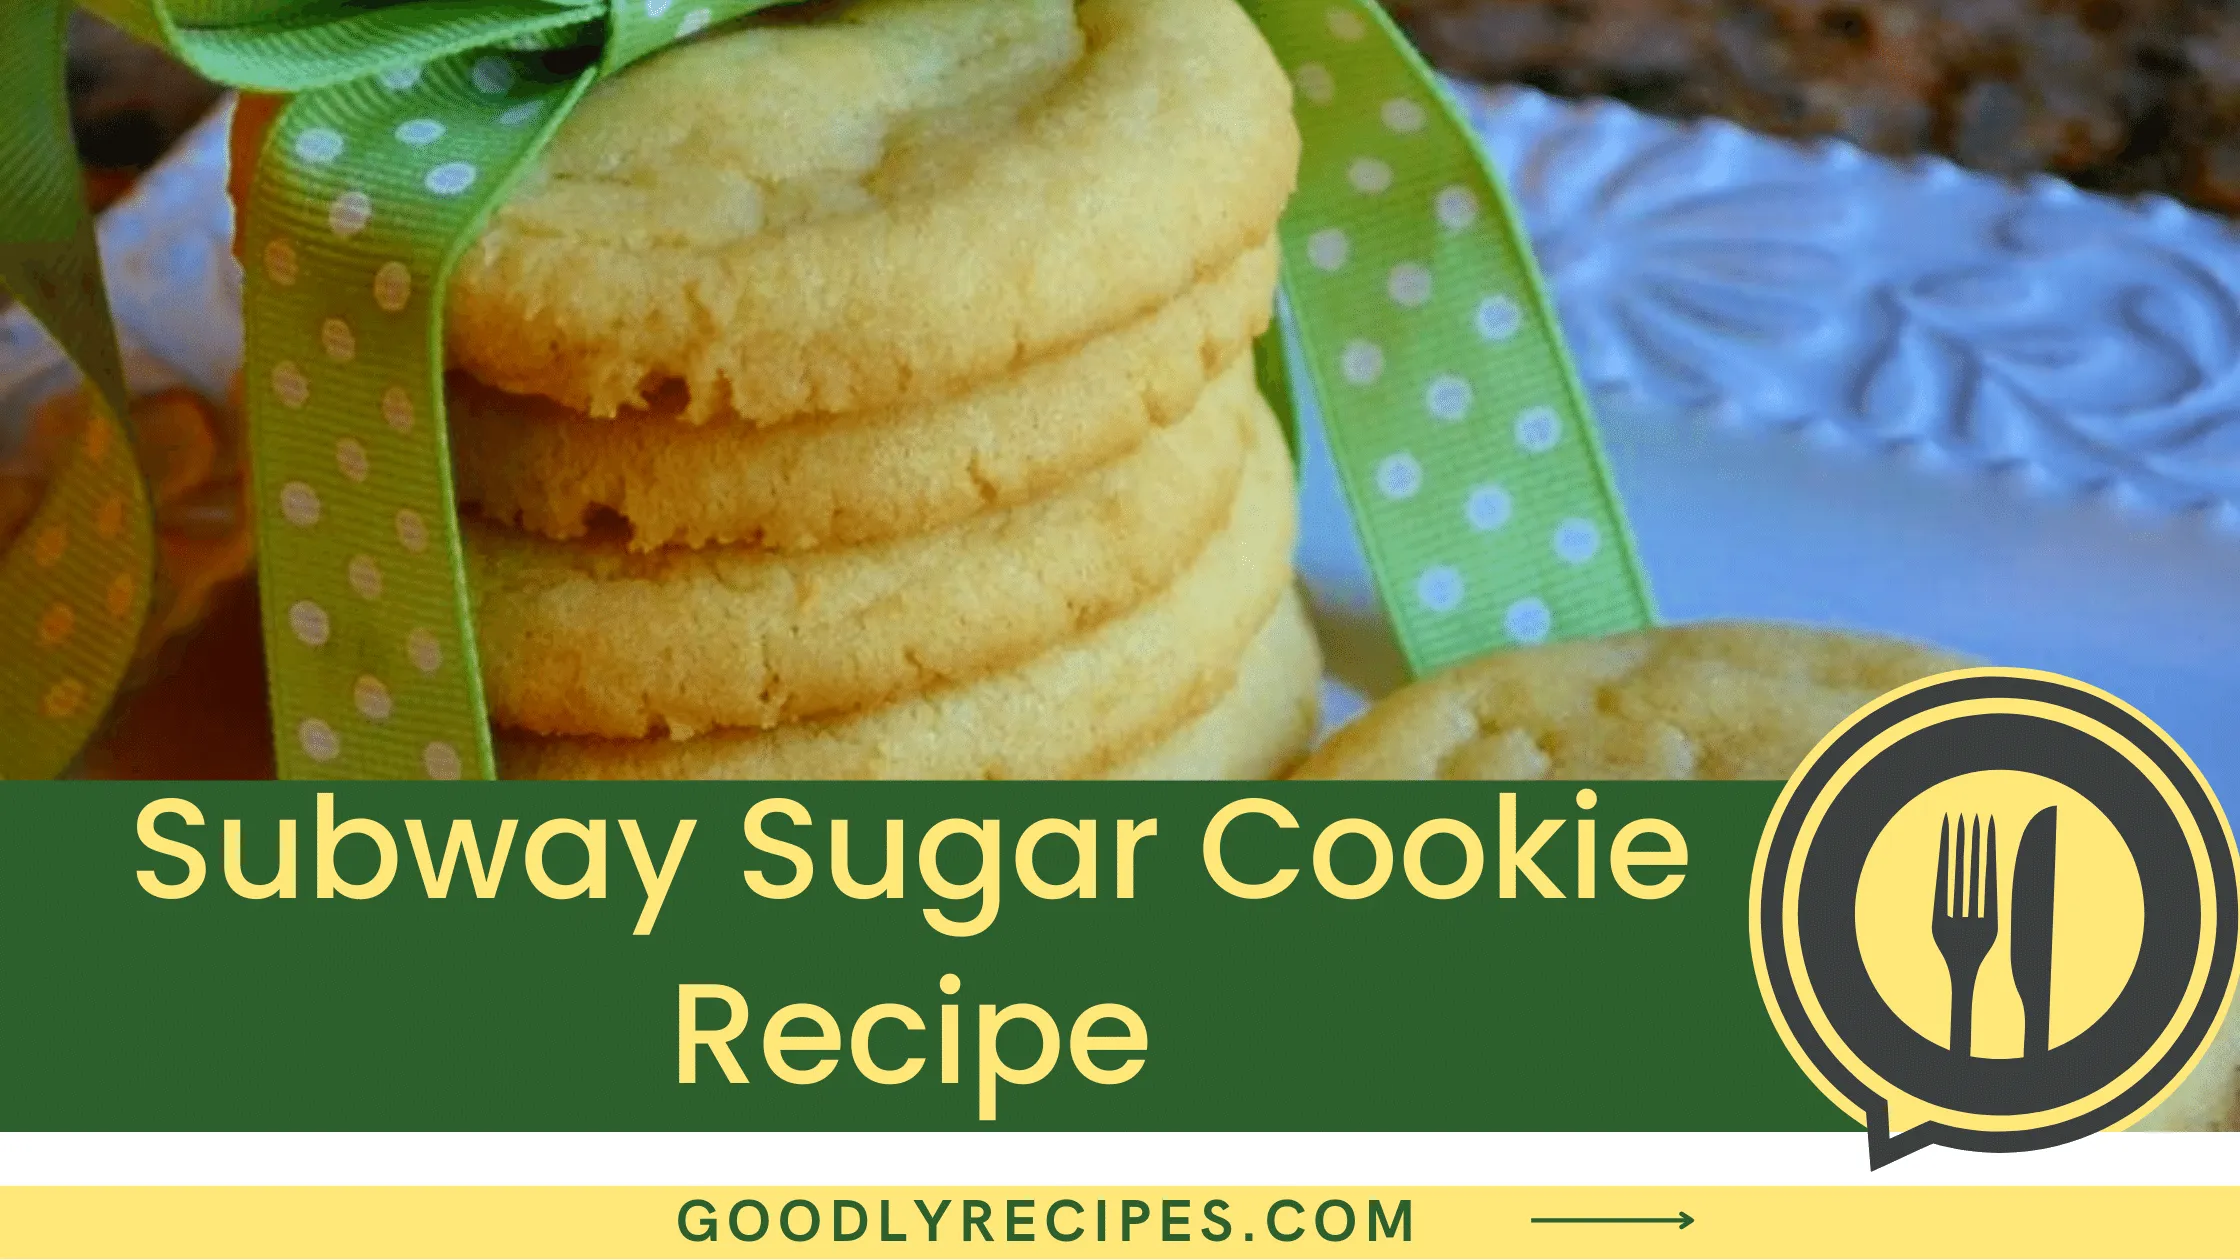 Subway Sugar Cookie Recipe - For Food Lovers